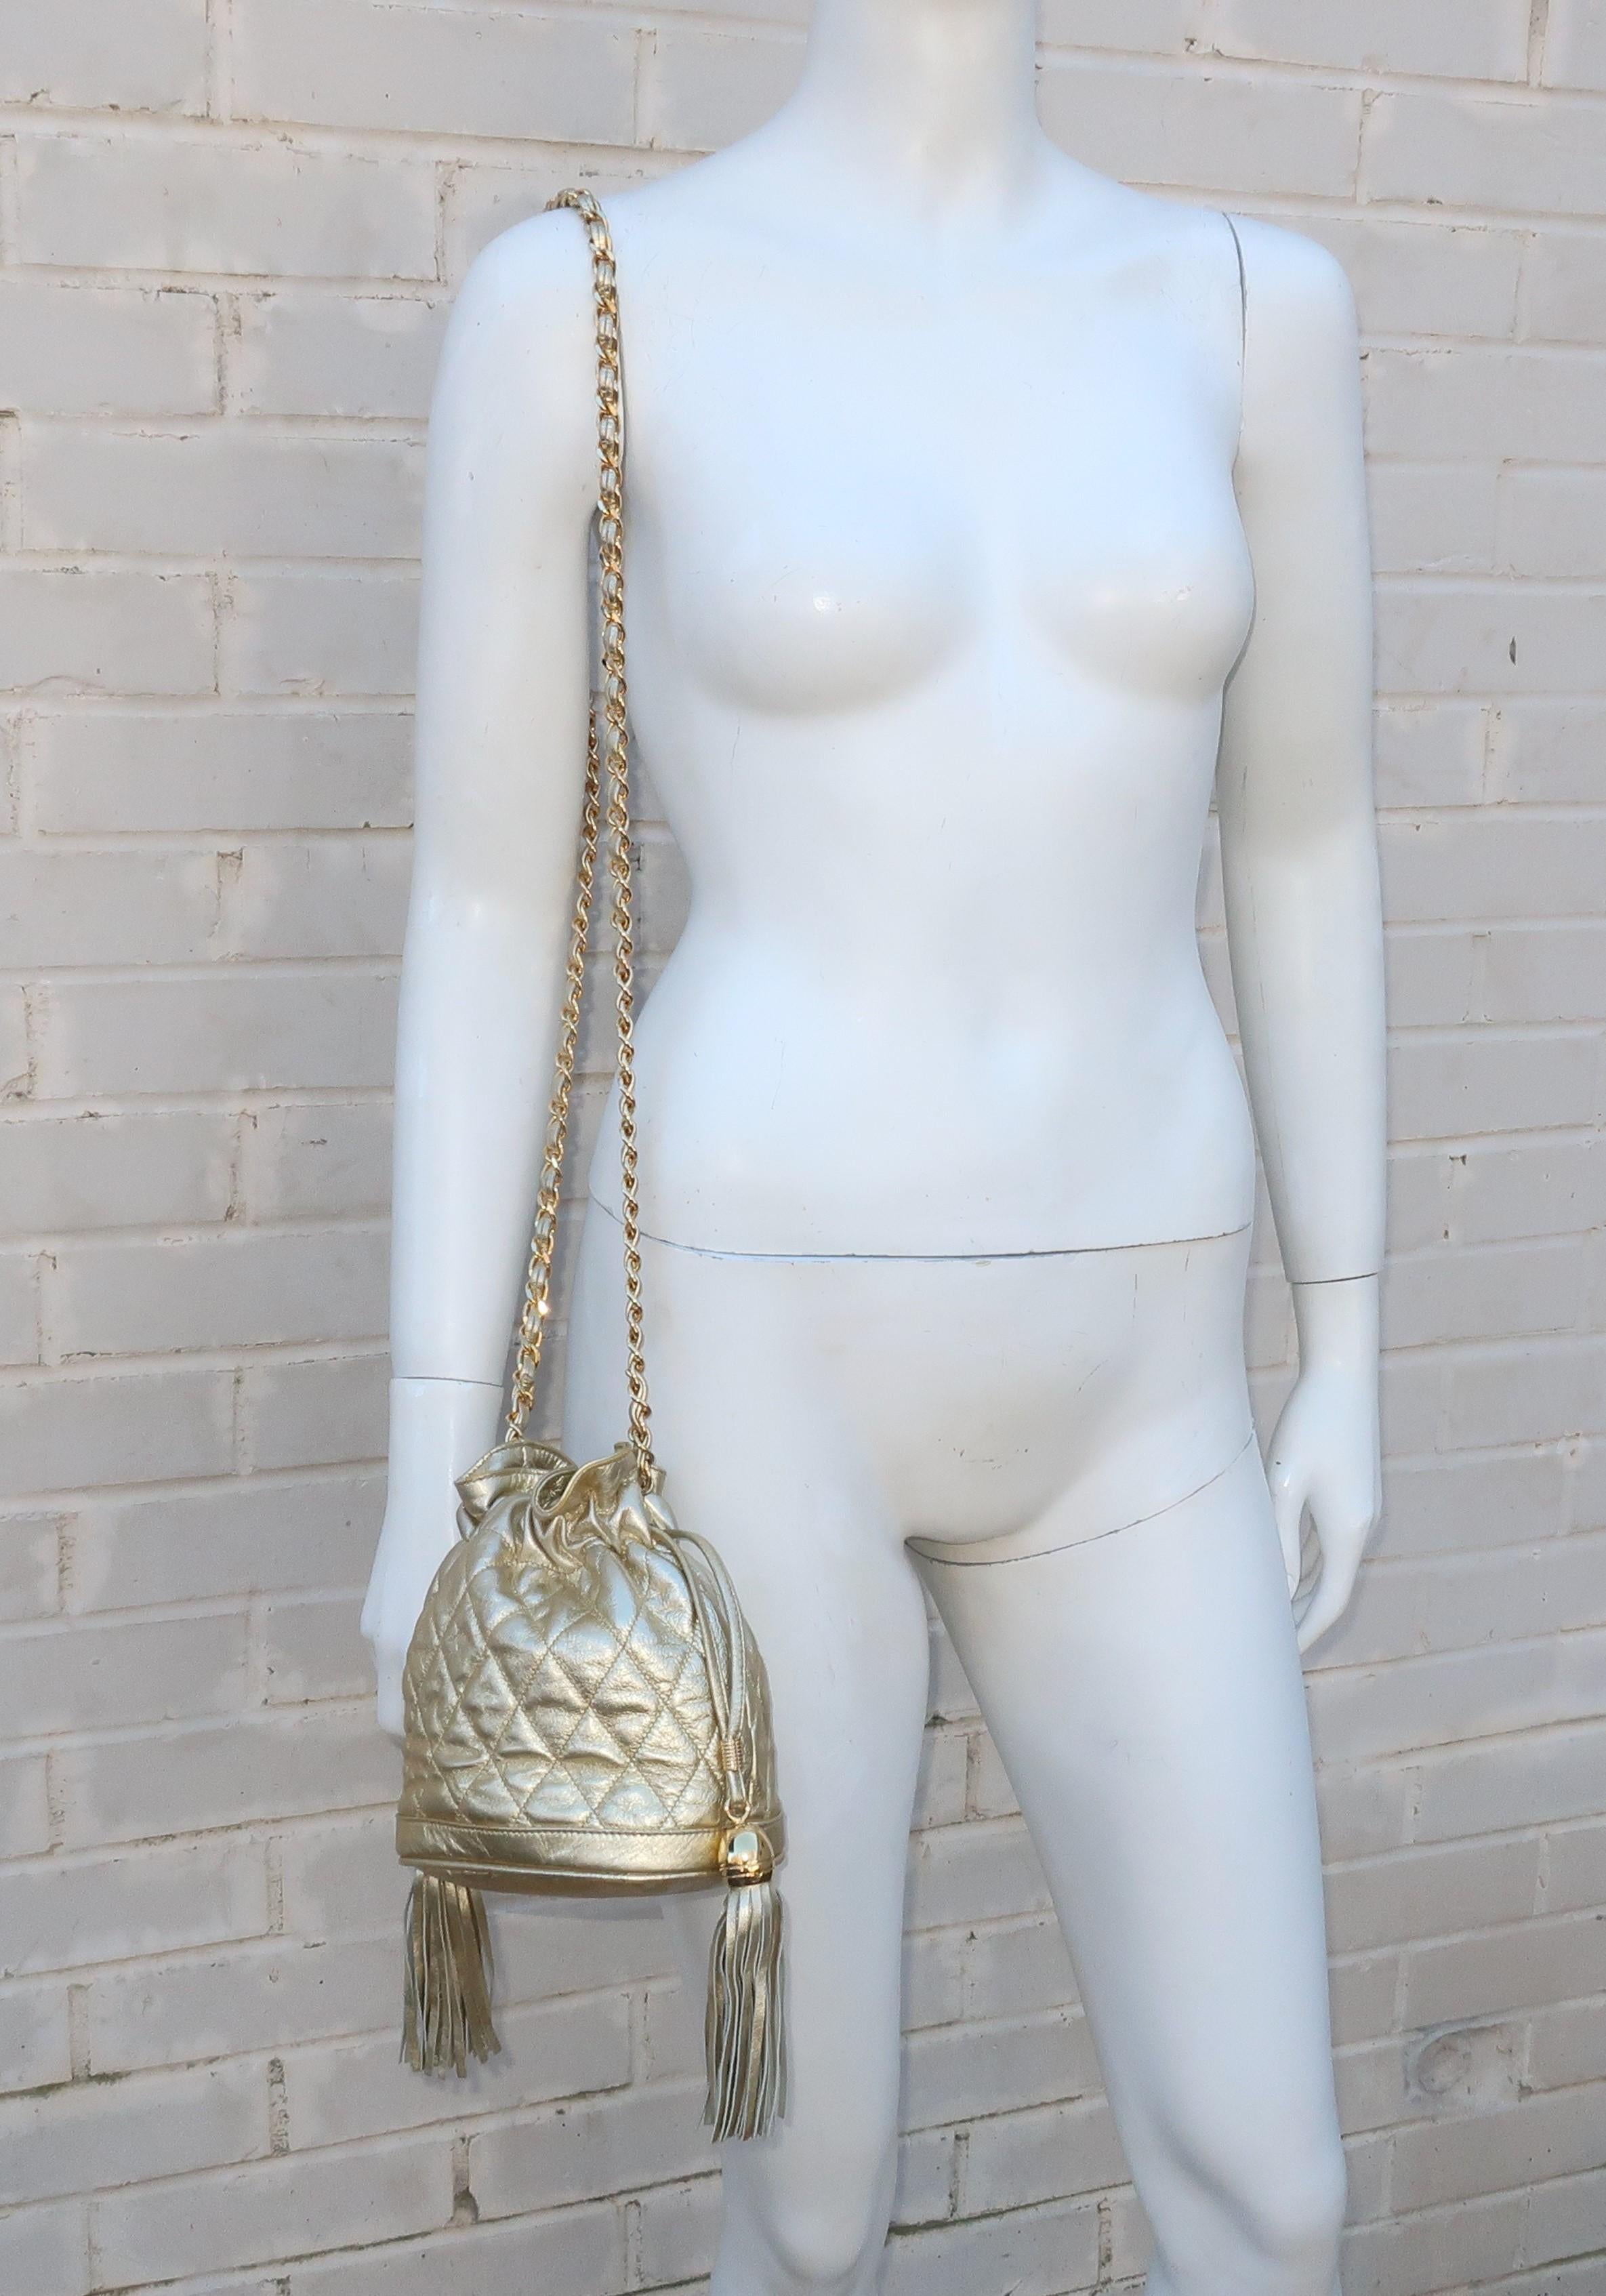 Vintage Quilted Gold Leather Hobo Handbag With Chain Handle 2